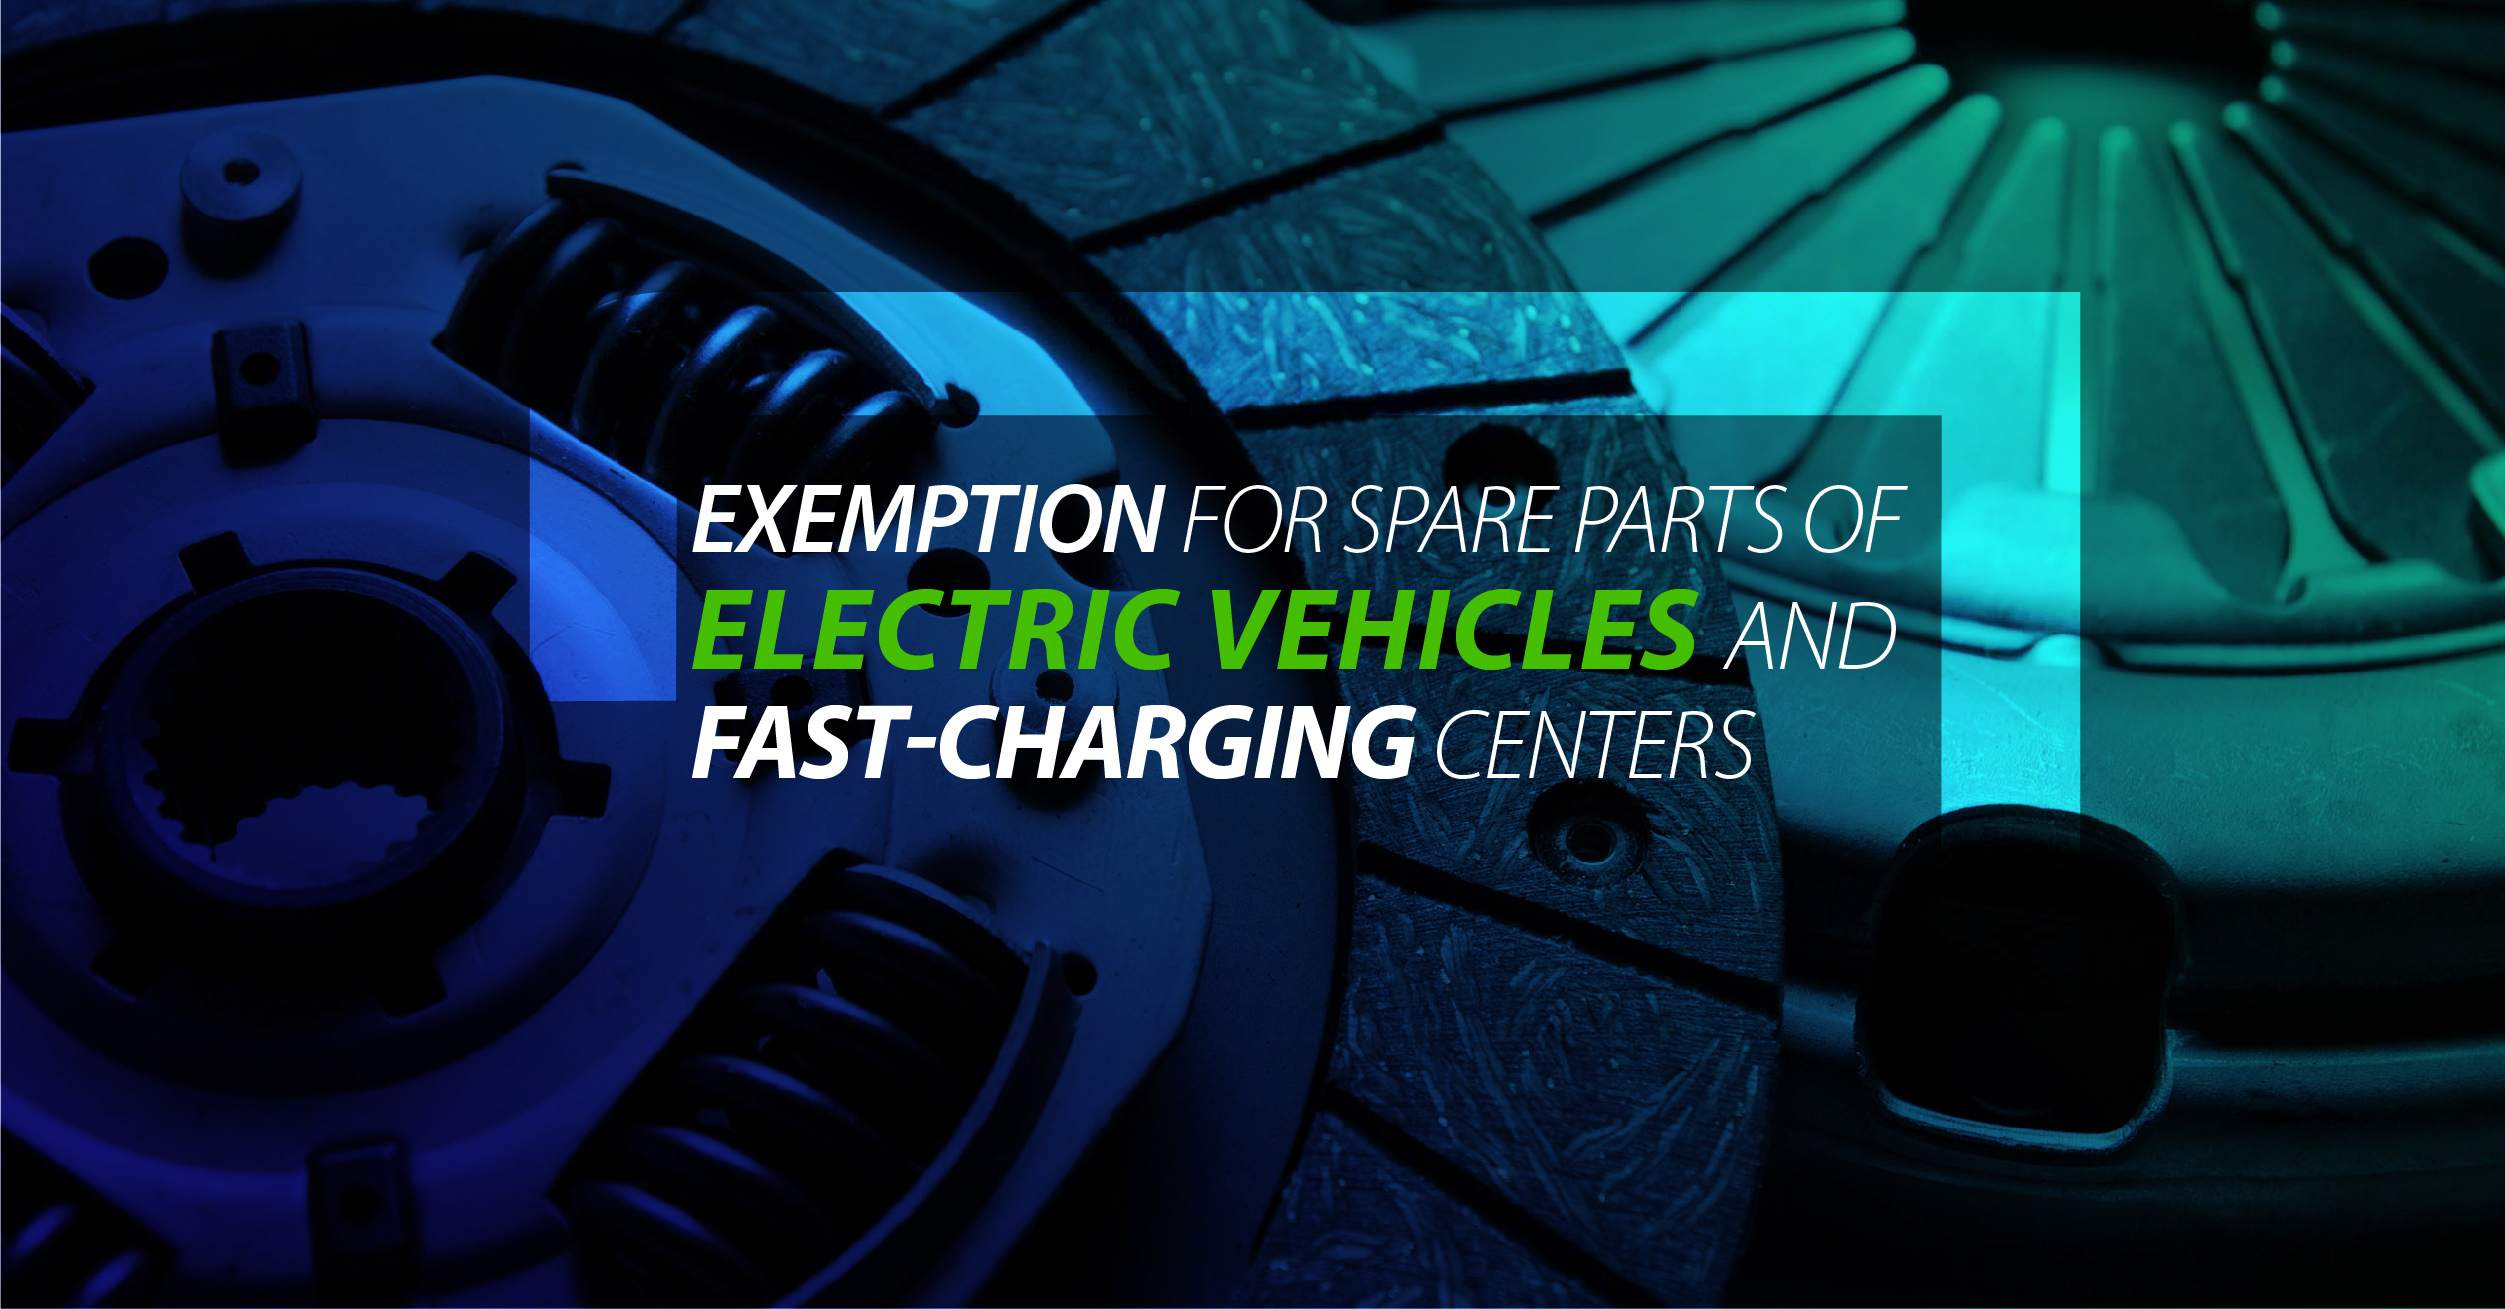 Exemption for spare parts of electric vehicles and fast-charging centers in Costa Rica